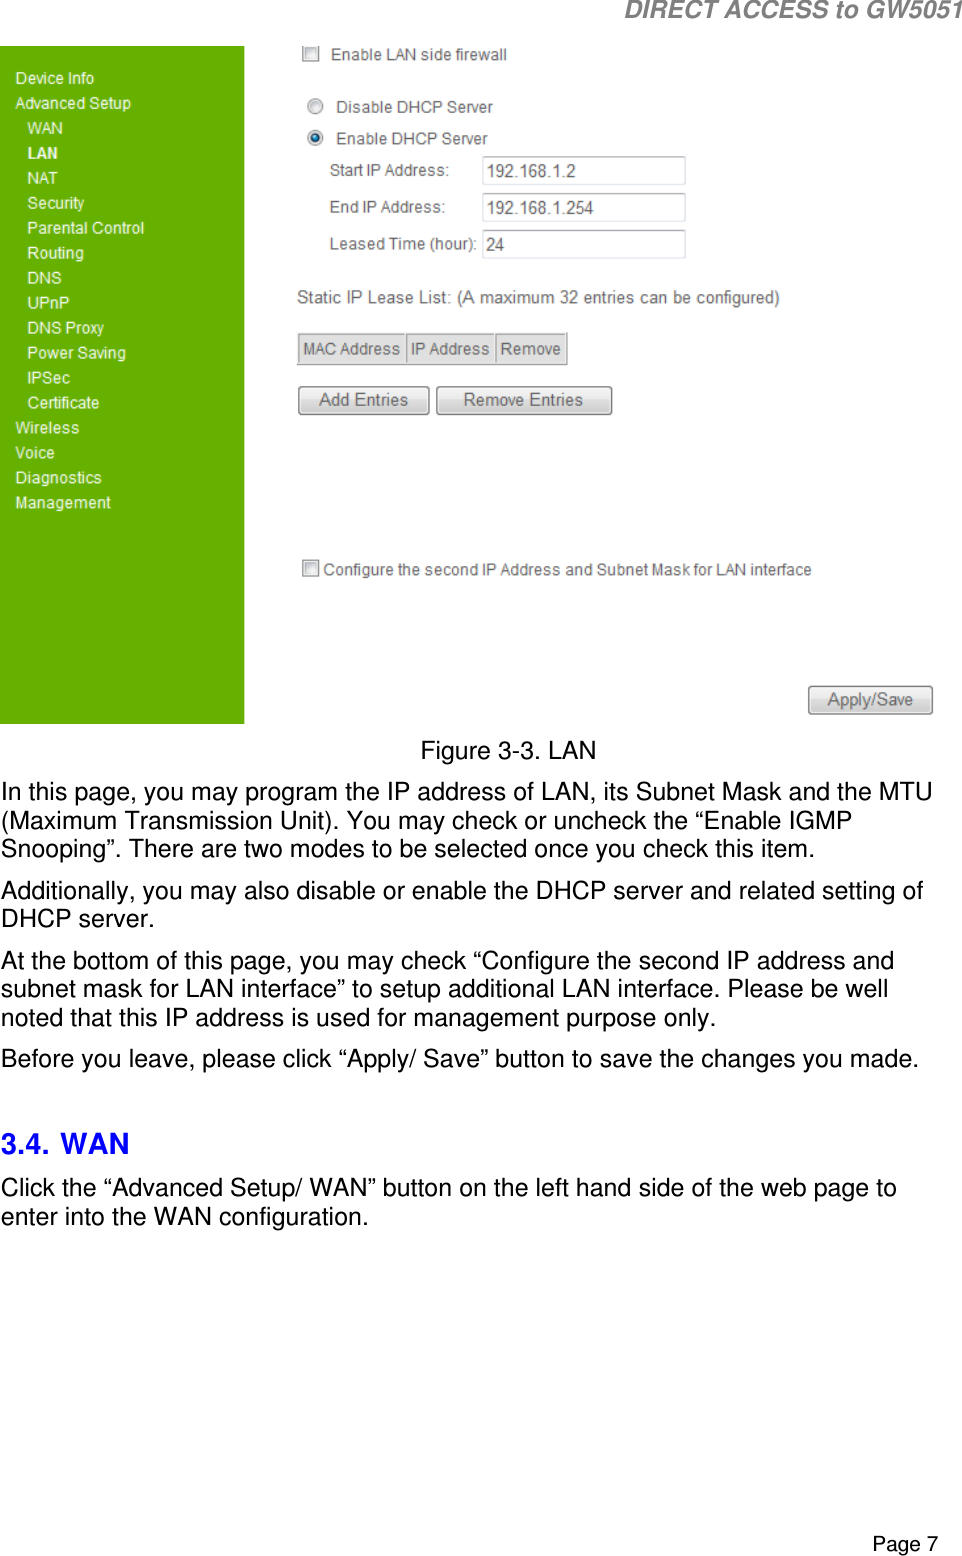                                                                                                                                                                                                                           DIRECT ACCESS to GW5051    Page 7  Figure 3-3. LAN In this page, you may program the IP address of LAN, its Subnet Mask and the MTU (Maximum Transmission Unit). You may check or uncheck the “Enable IGMP Snooping”. There are two modes to be selected once you check this item.  Additionally, you may also disable or enable the DHCP server and related setting of DHCP server. At the bottom of this page, you may check “Configure the second IP address and subnet mask for LAN interface” to setup additional LAN interface. Please be well noted that this IP address is used for management purpose only. Before you leave, please click “Apply/ Save” button to save the changes you made.  3.4. WAN Click the “Advanced Setup/ WAN” button on the left hand side of the web page to enter into the WAN configuration.  